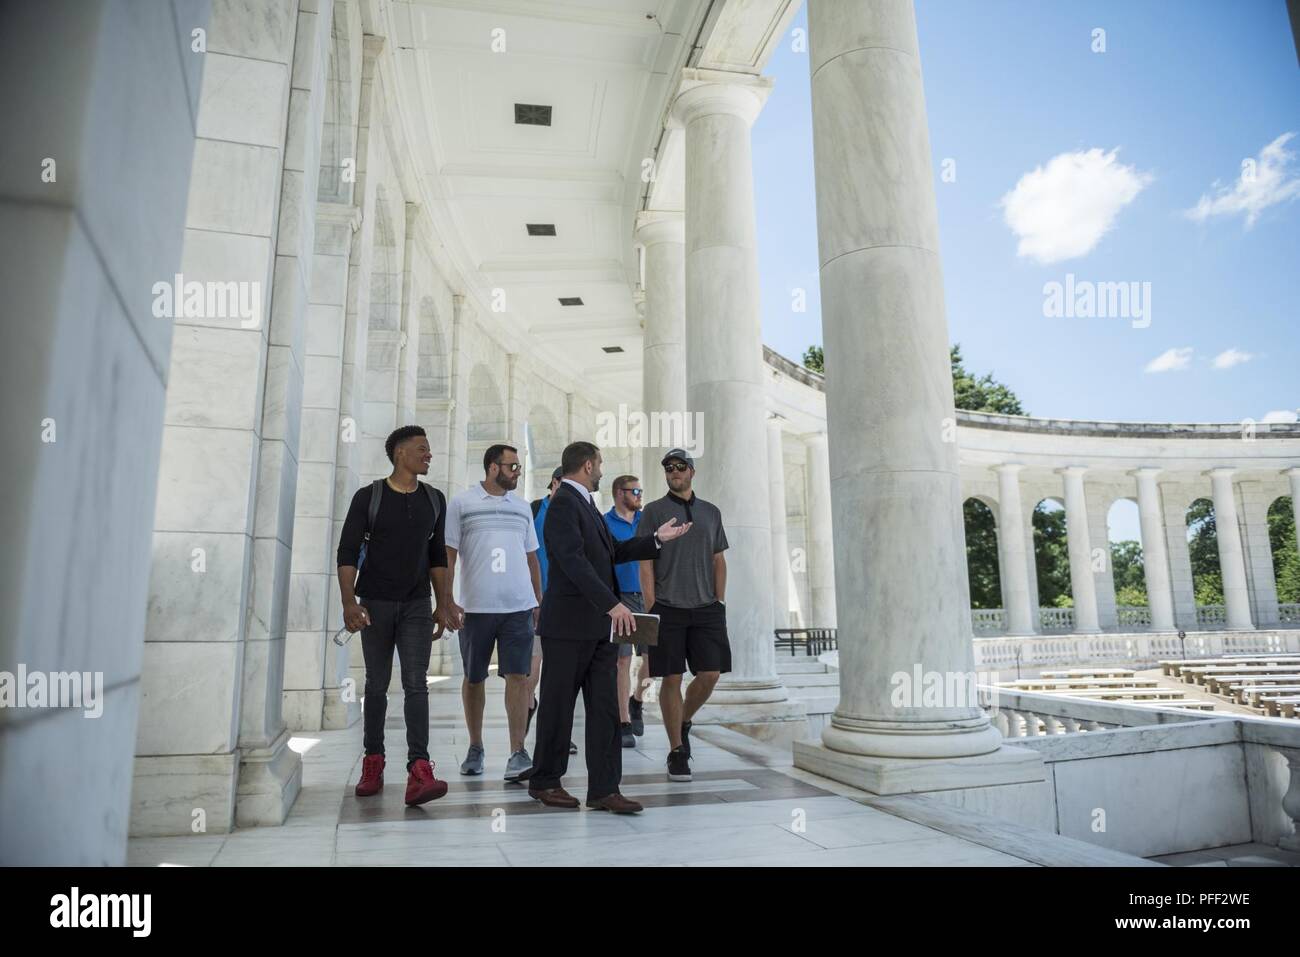 Micheal Migliara (center), events & ceremonies director, Arlington National Cemetery; talks with Detroit Lions players (from left to right) Marvin Jones Jr., Don Muhlbach, T.J. Lang, and Matthew Stafford inside of the Memorial Amphitheater at Arlington National Cemetery, Arlington, Virginia, June 12, 2018. The Lions visited Arlington National Cemetery to participate in an educational staff ride where they spoke with cemetery representatives, field operations, received a tour of the Memorial Amphitheater Display Room from ANC historians, and watched the Changing of the Guard Ceremony at the Tom Stock Photo